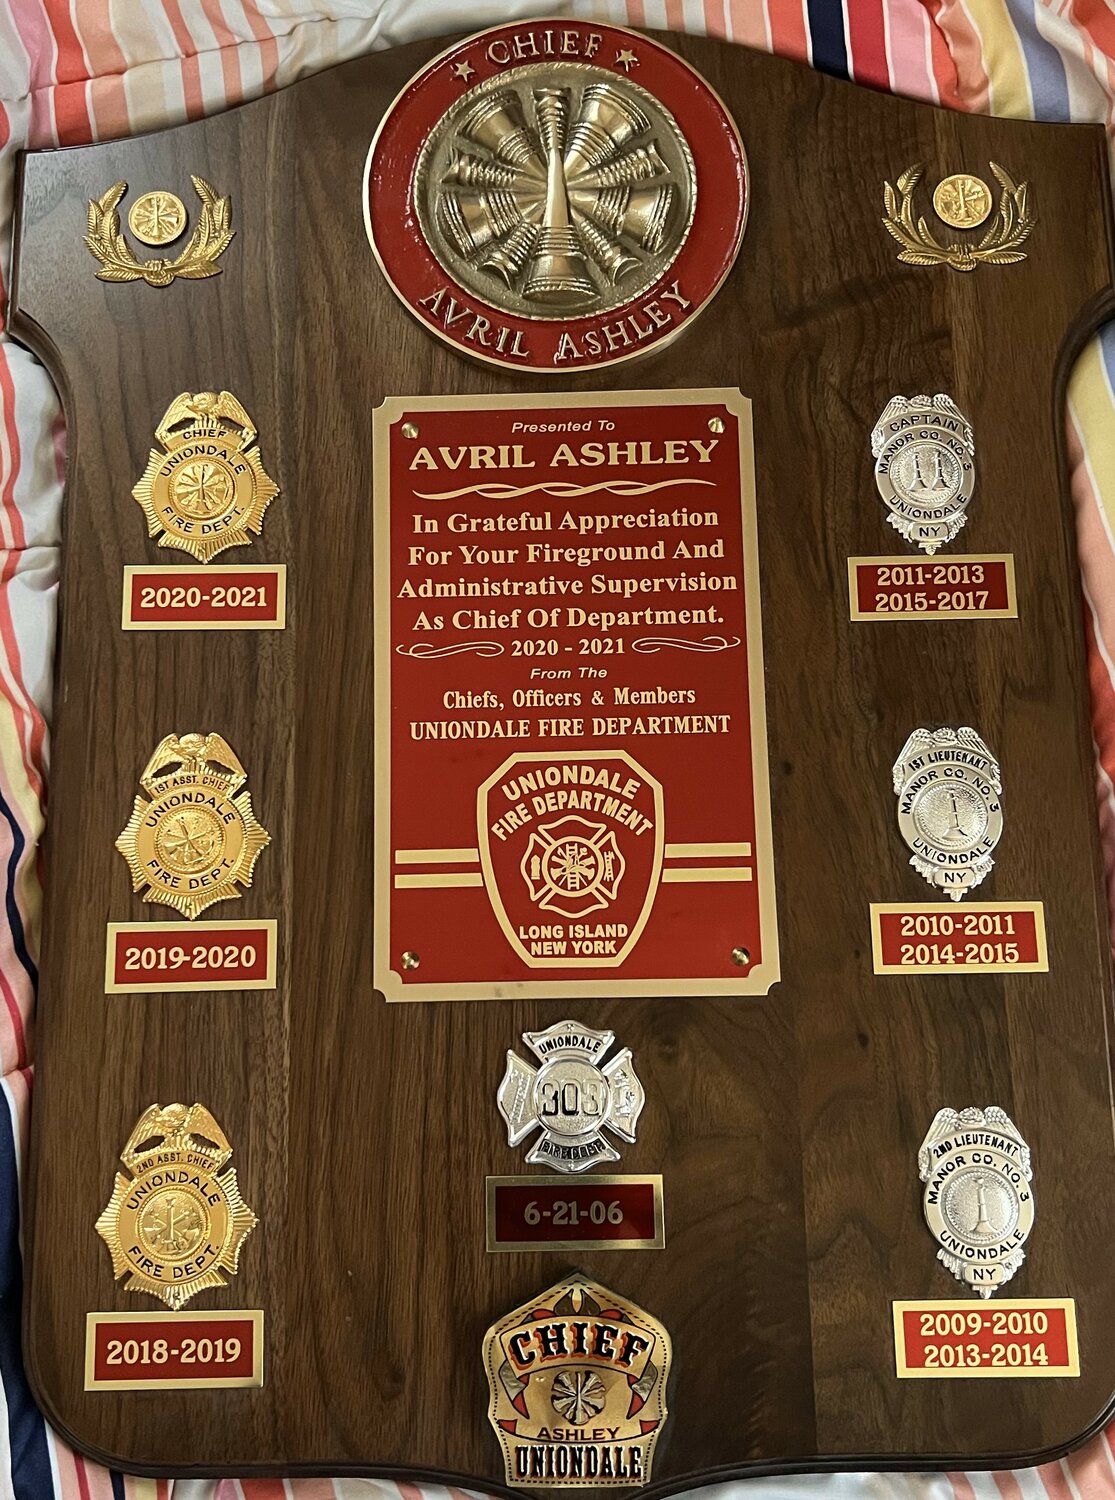 A 2021 plaque of appreciation from the Uniondale Fire Department commended Lt. Avril Ashley for his years of service.